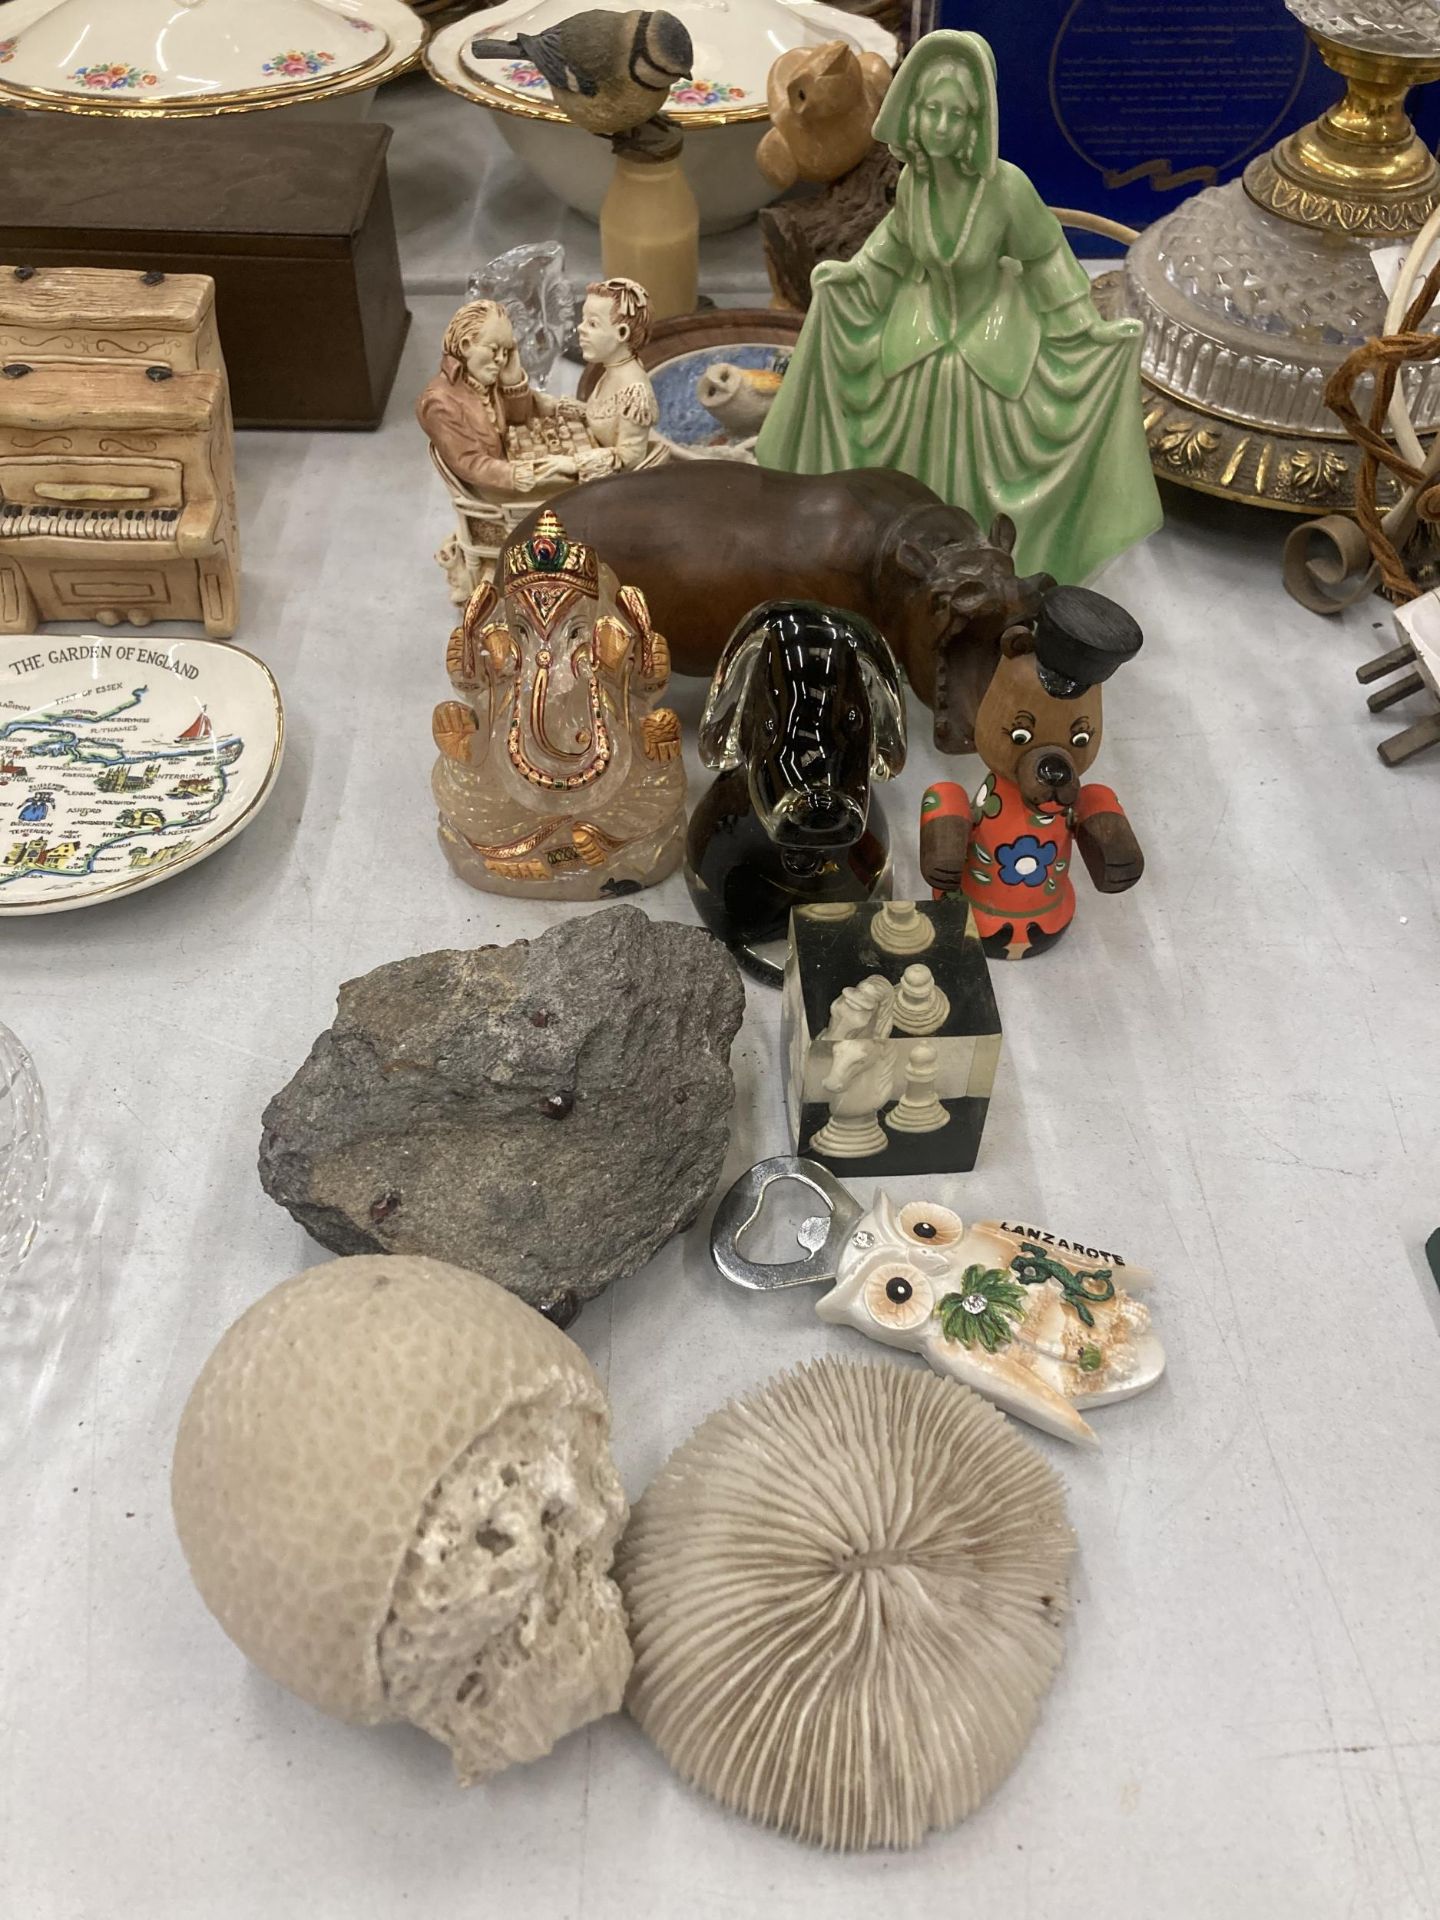 A MIXED LOT TO INCLUDE BIRD FIGURES, A LADY FIGURINE, TREEN HIPPO, GLASS ANIMALS, CHESS PIECE